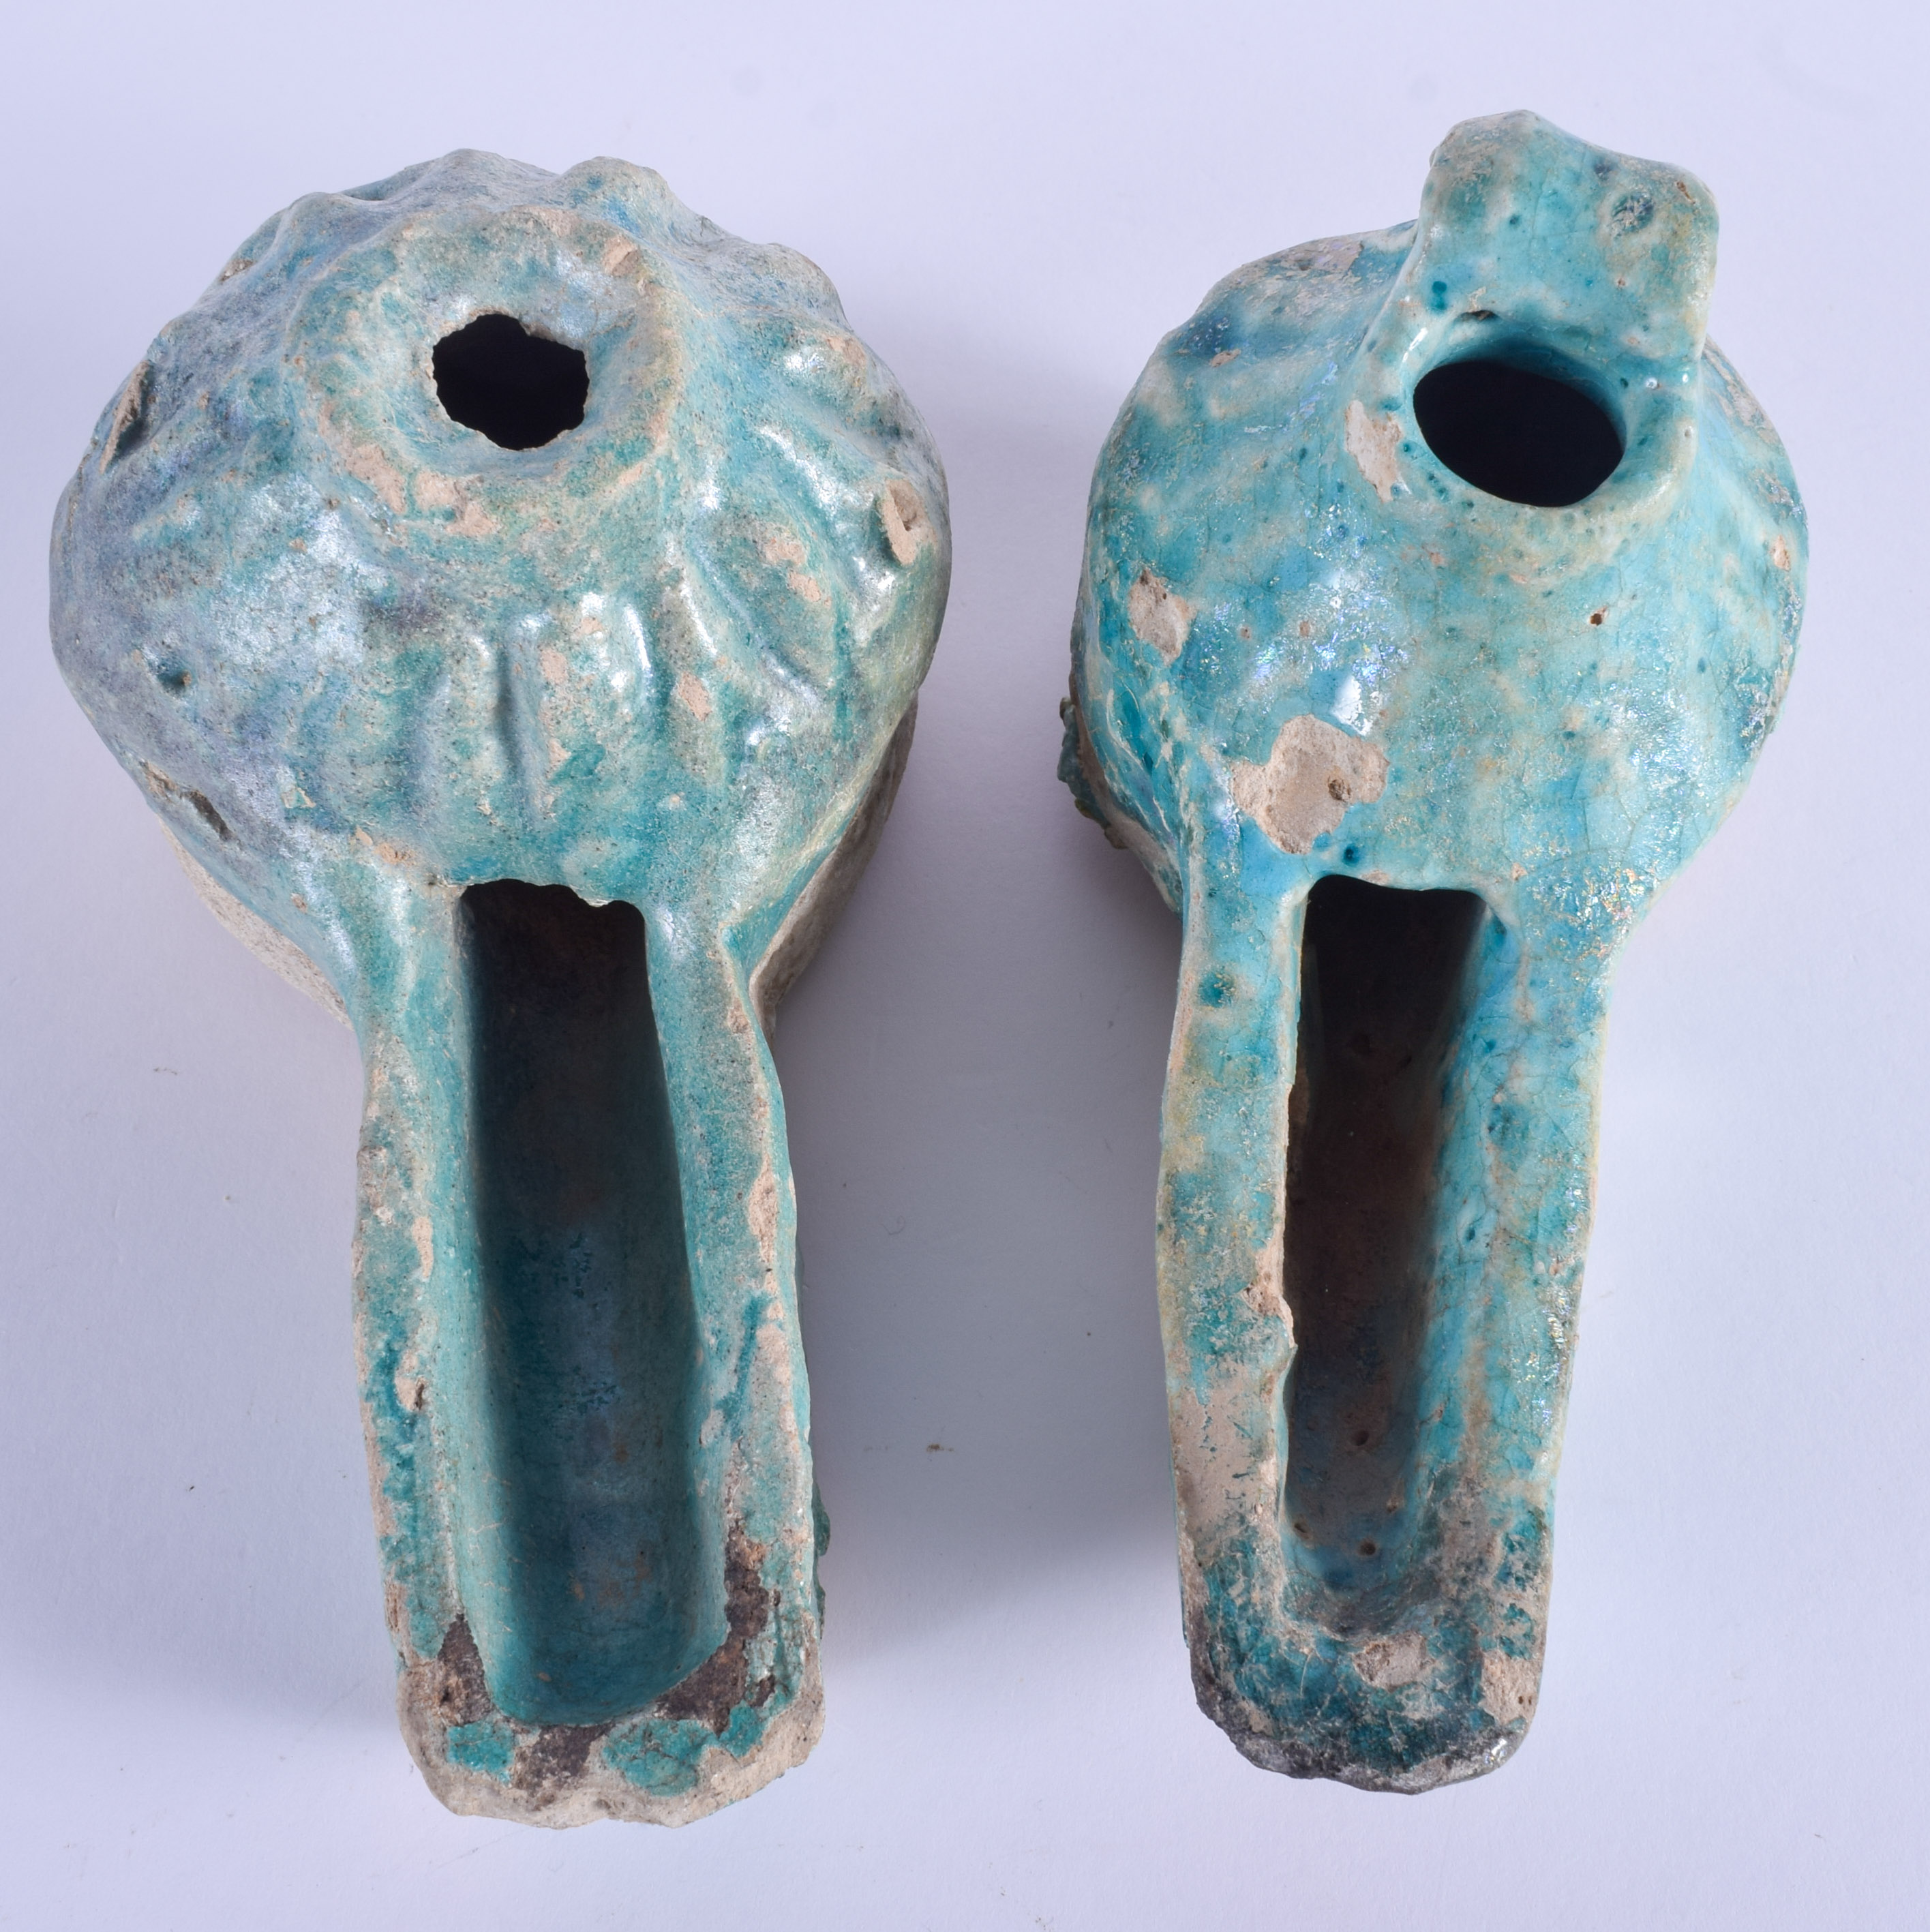 A PAIR OF 12TH/13TH CENTURY PERSIAN TURQUOISE GLAZED OIL LAMPS Iran. 14 cm x 7 cm. (2) - Image 3 of 4